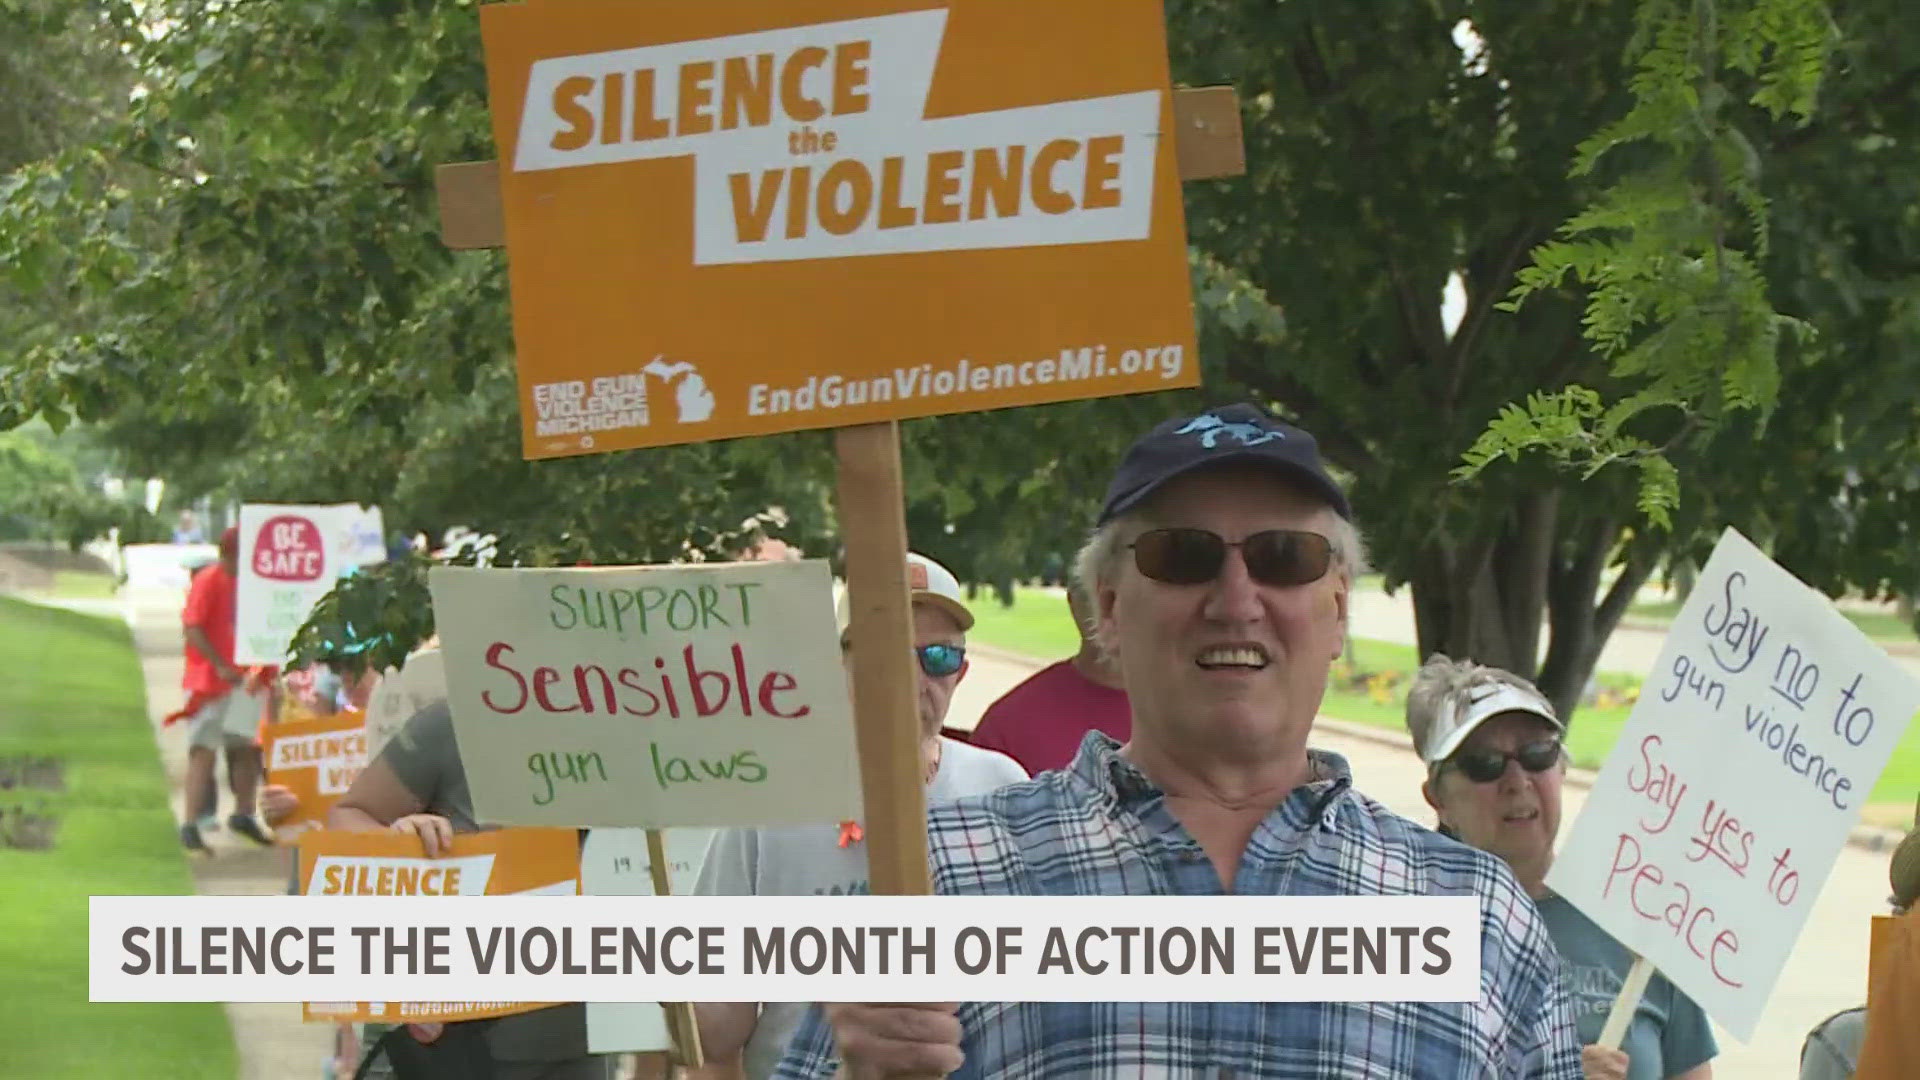 More than 20 Silence the Violence events are happening across Michigan throughout June, which has been called the Silence the Violence Month of Action.